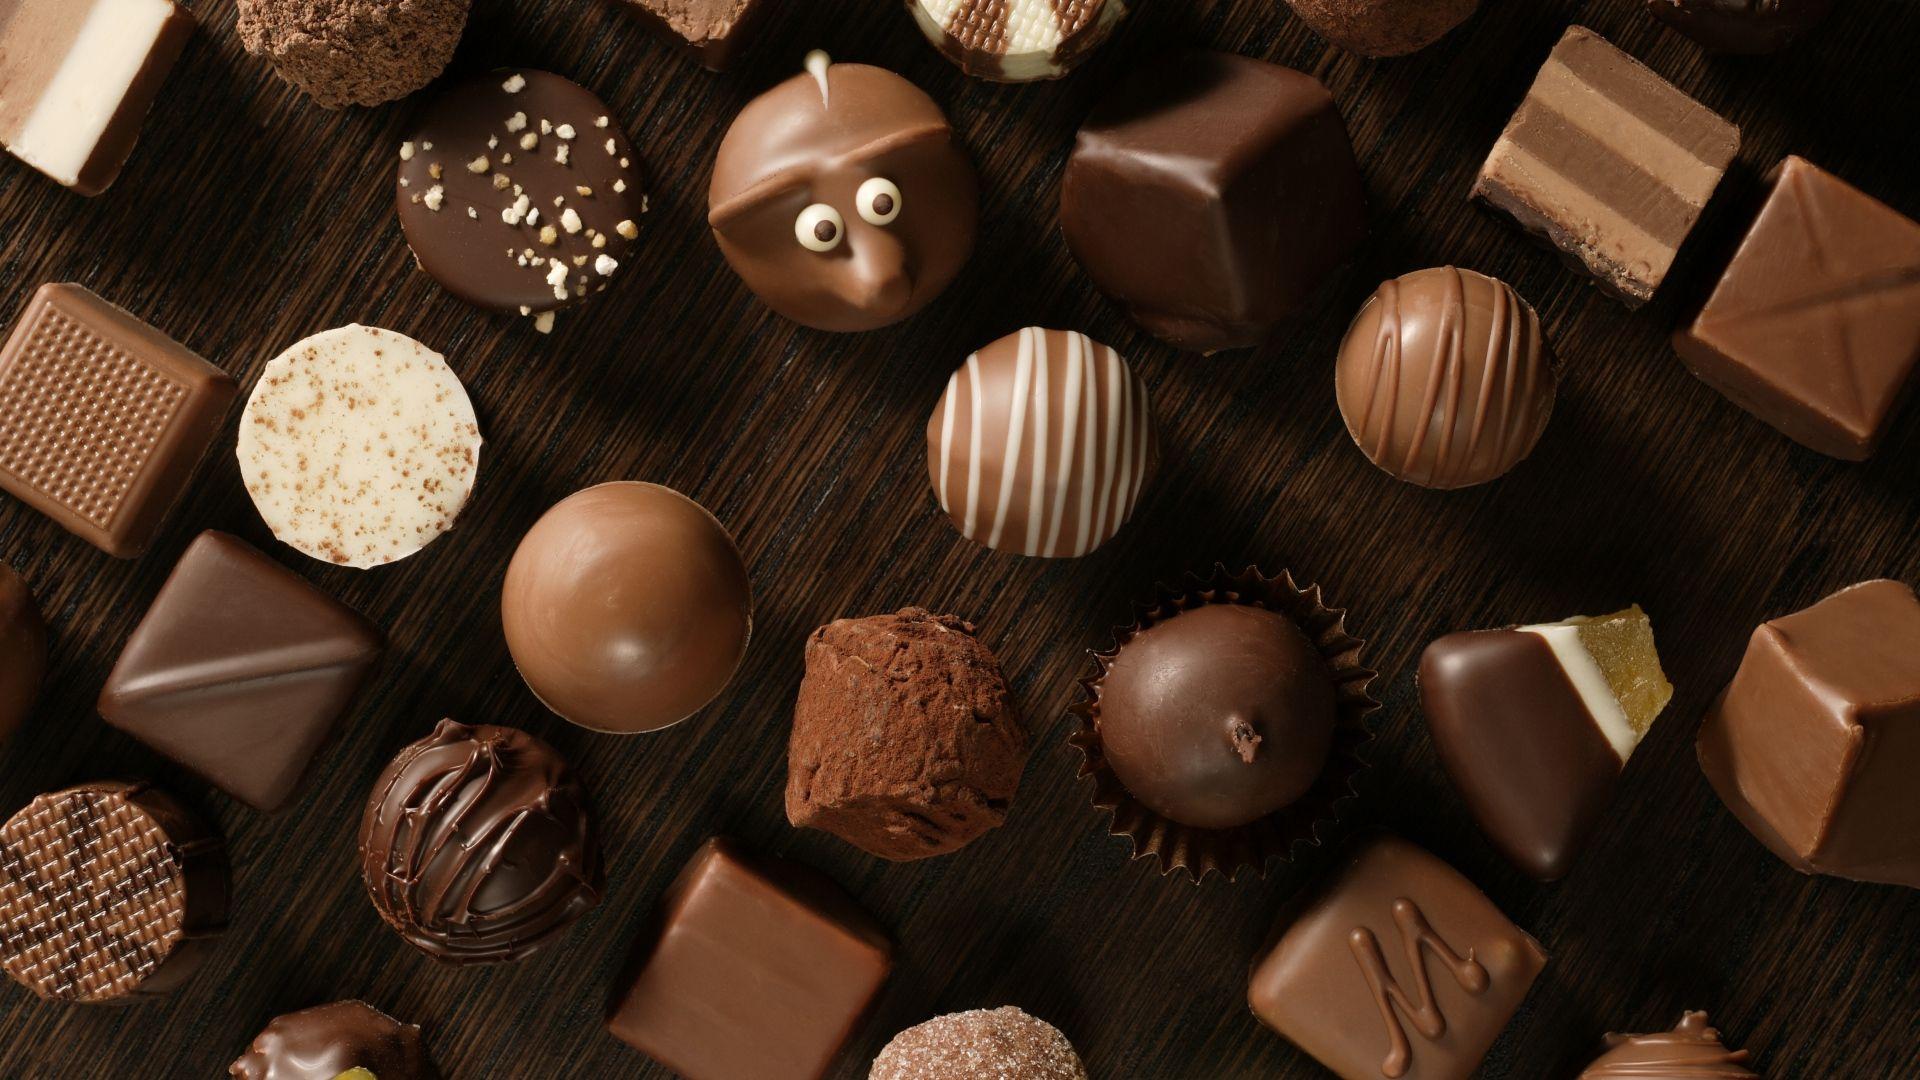 Download Wallpaper 1920x1080 chocolate, candies, table, allsorts